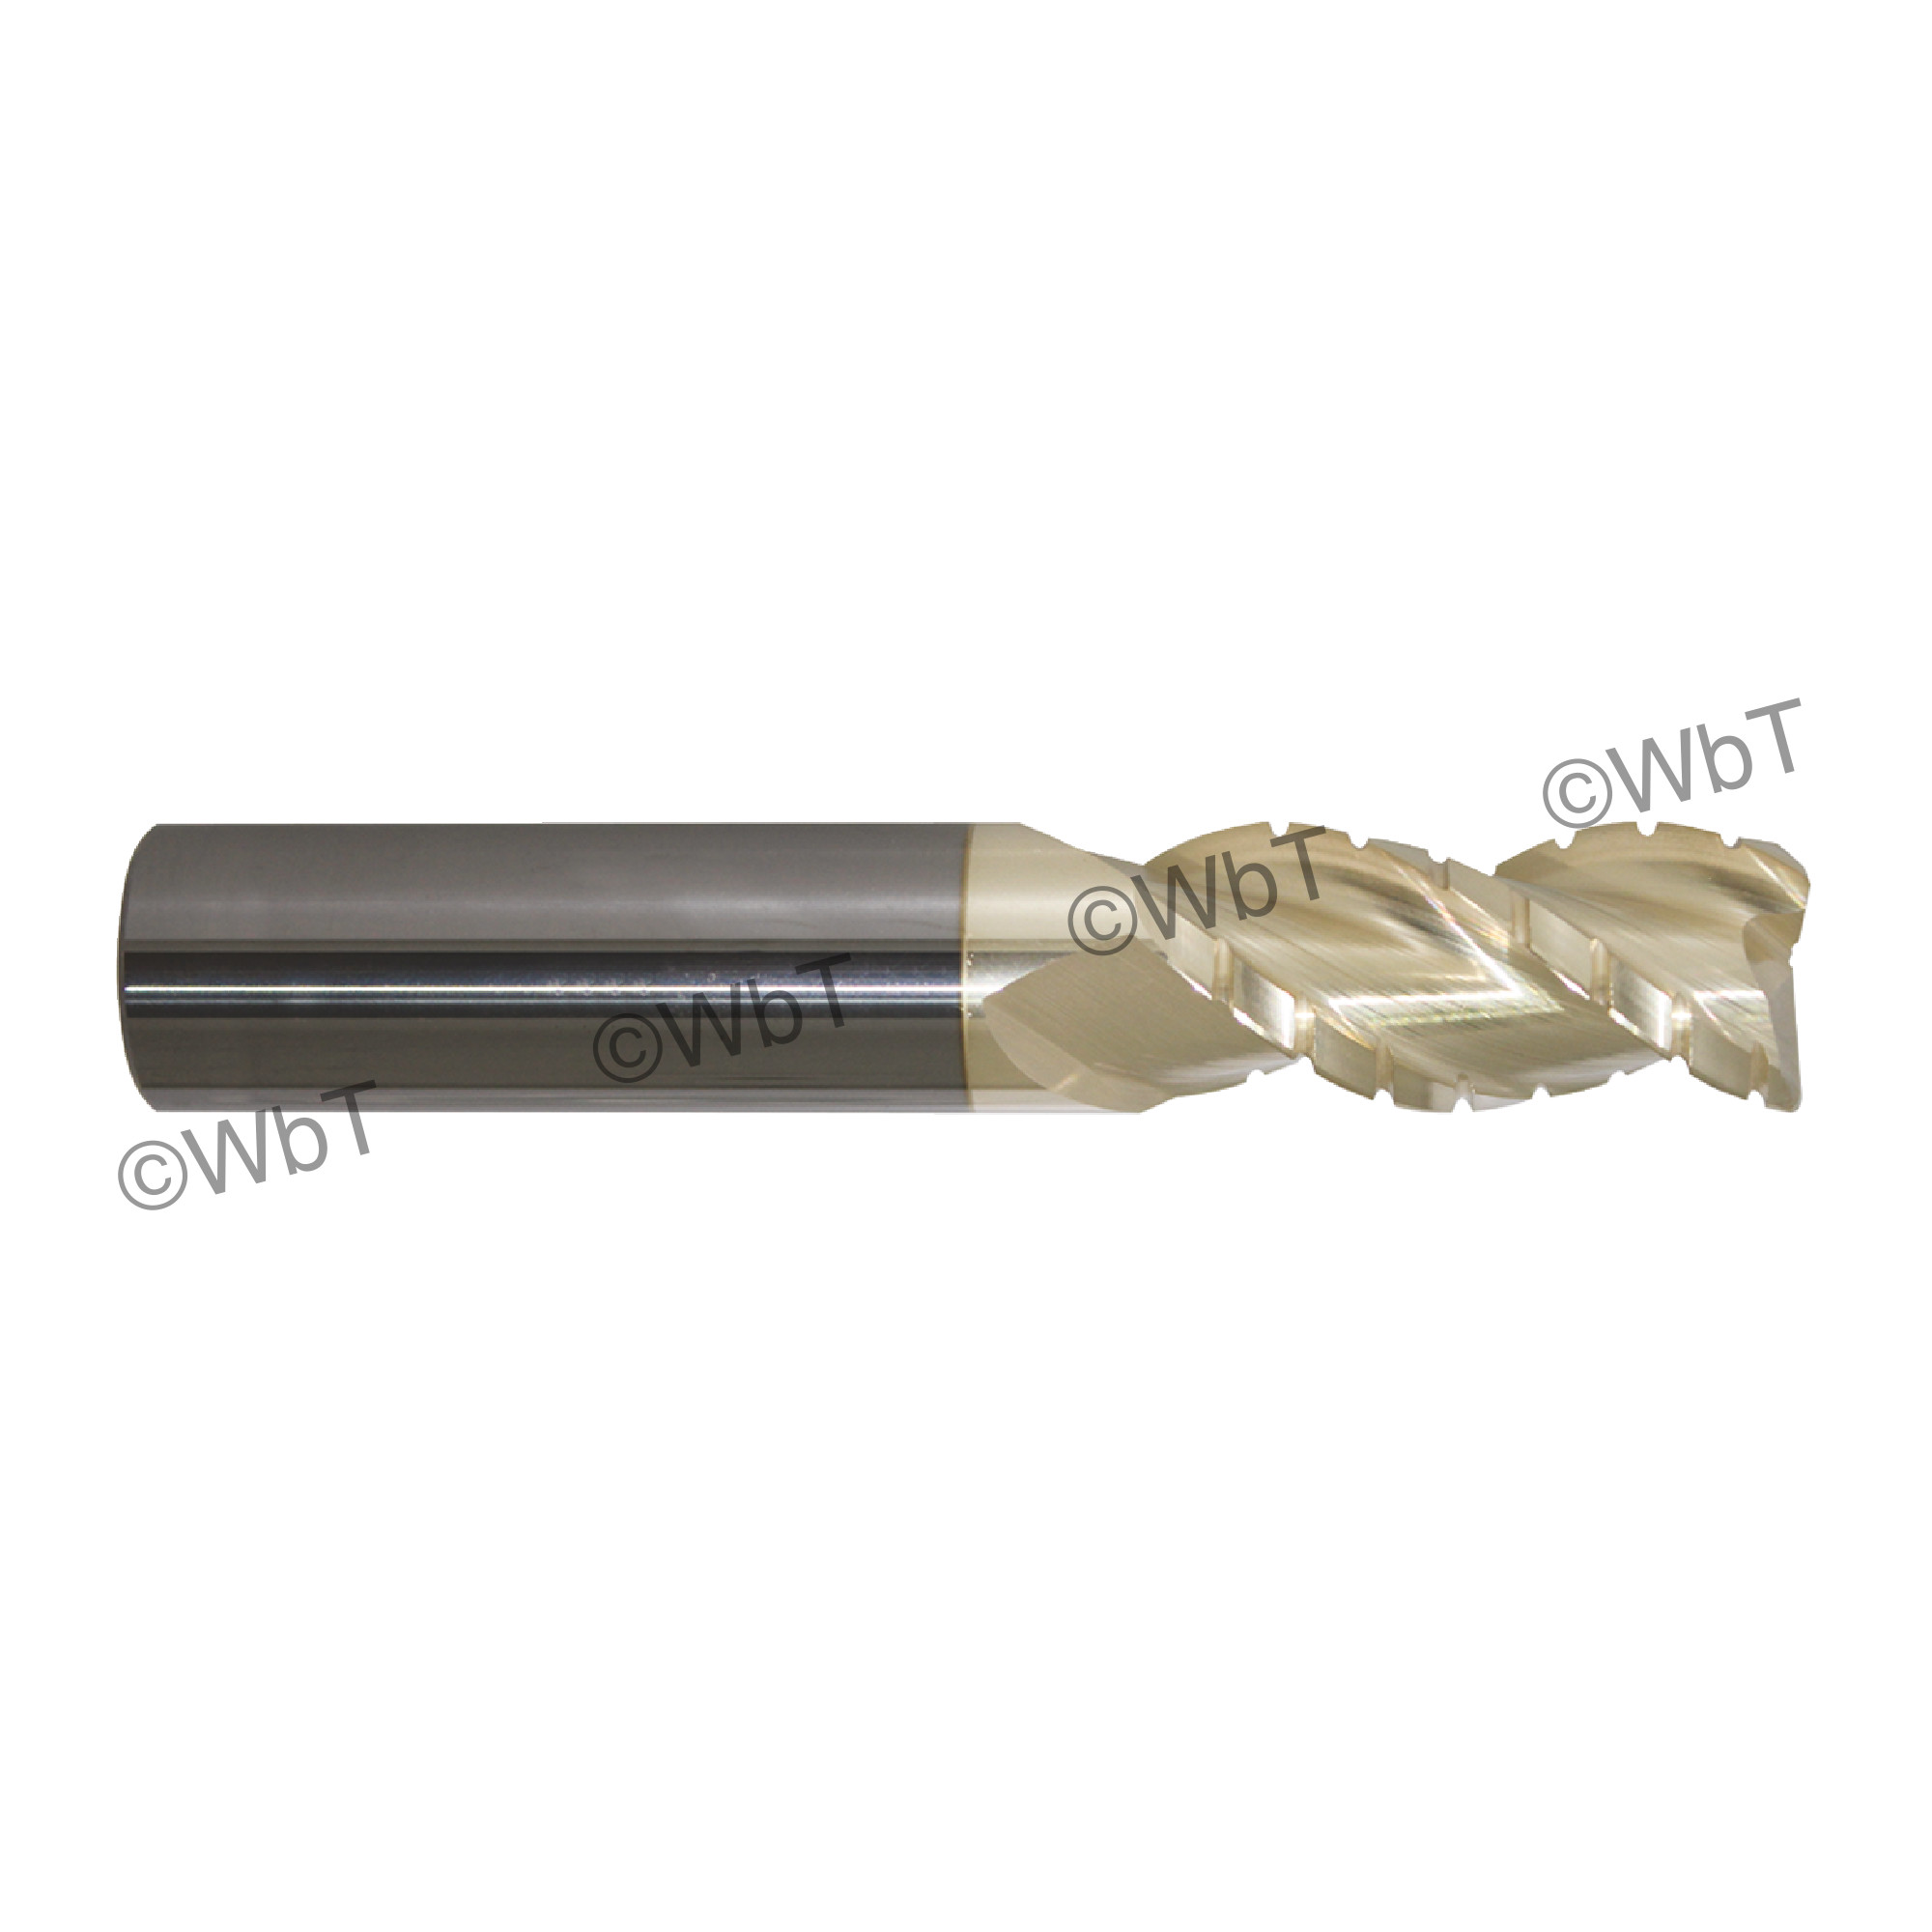 Promax Solid Carbide 3 Flute Roughing-Finishing Corner Radius End Mill 5/16" 119-02016 Series 119